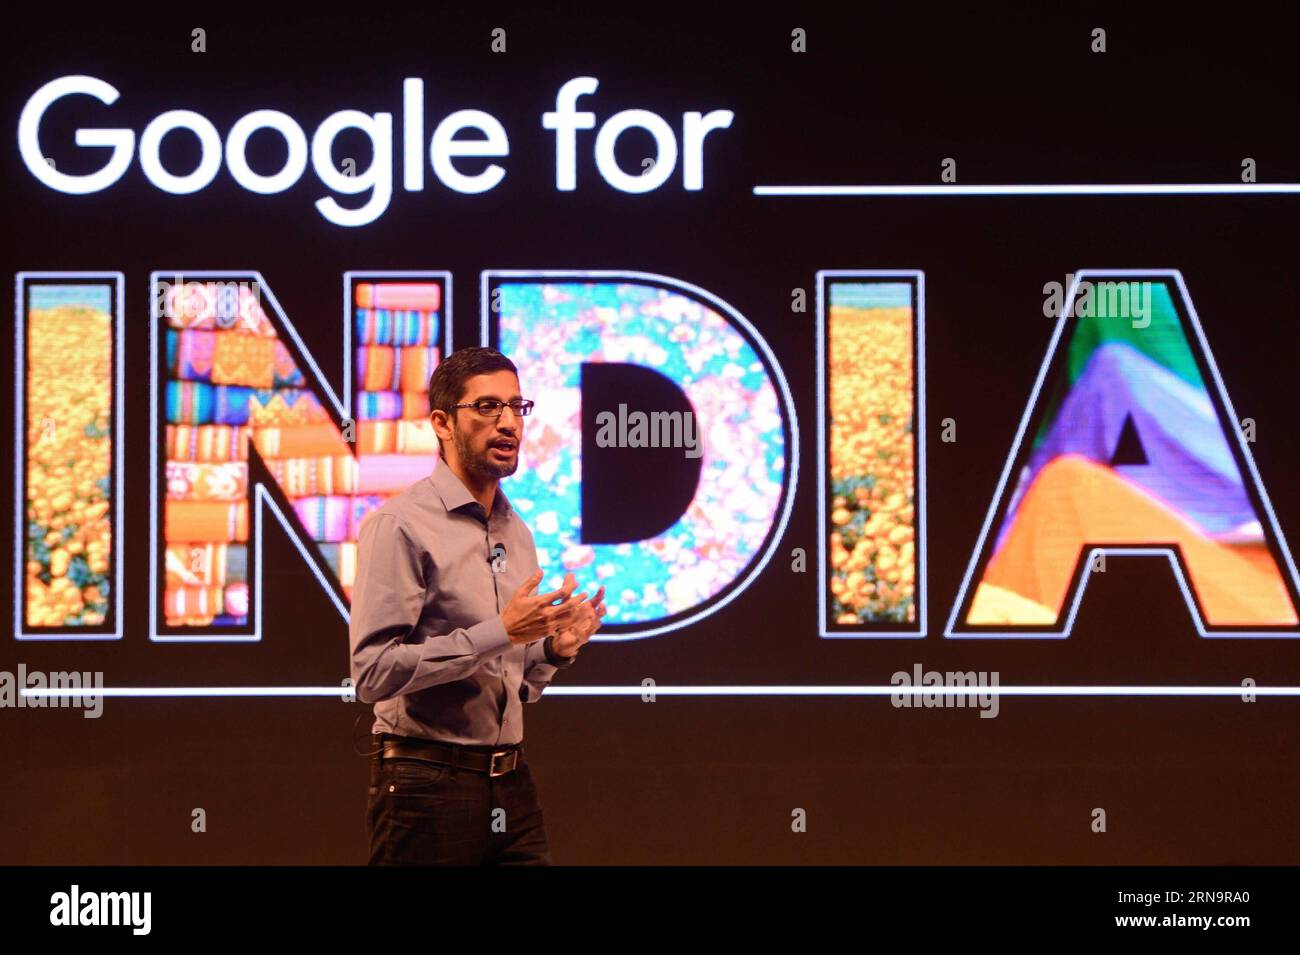 NEW DELHI, Dec. 16, 2015 -- Chief Executive Officer of Google Inc. Sundar Pichai speaks at a news conference in New Delhi, India, Dec. 16, 2015. Sundar Pichai on Wednesday announced the company s plans to expand products and services in India. ) INDIA-NEW DELHI-GOOGLE-PRESS CONFERENCE Stringer PUBLICATIONxNOTxINxCHN   New Delhi DEC 16 2015 Chief Executive Officer of Google INC Sundar Pichai Speaks AT a News Conference in New Delhi India DEC 16 2015 Sundar Pichai ON Wednesday announced The Company S Plan to expand Products and Services in India India New Delhi Google Press Conference Stringer P Stock Photo